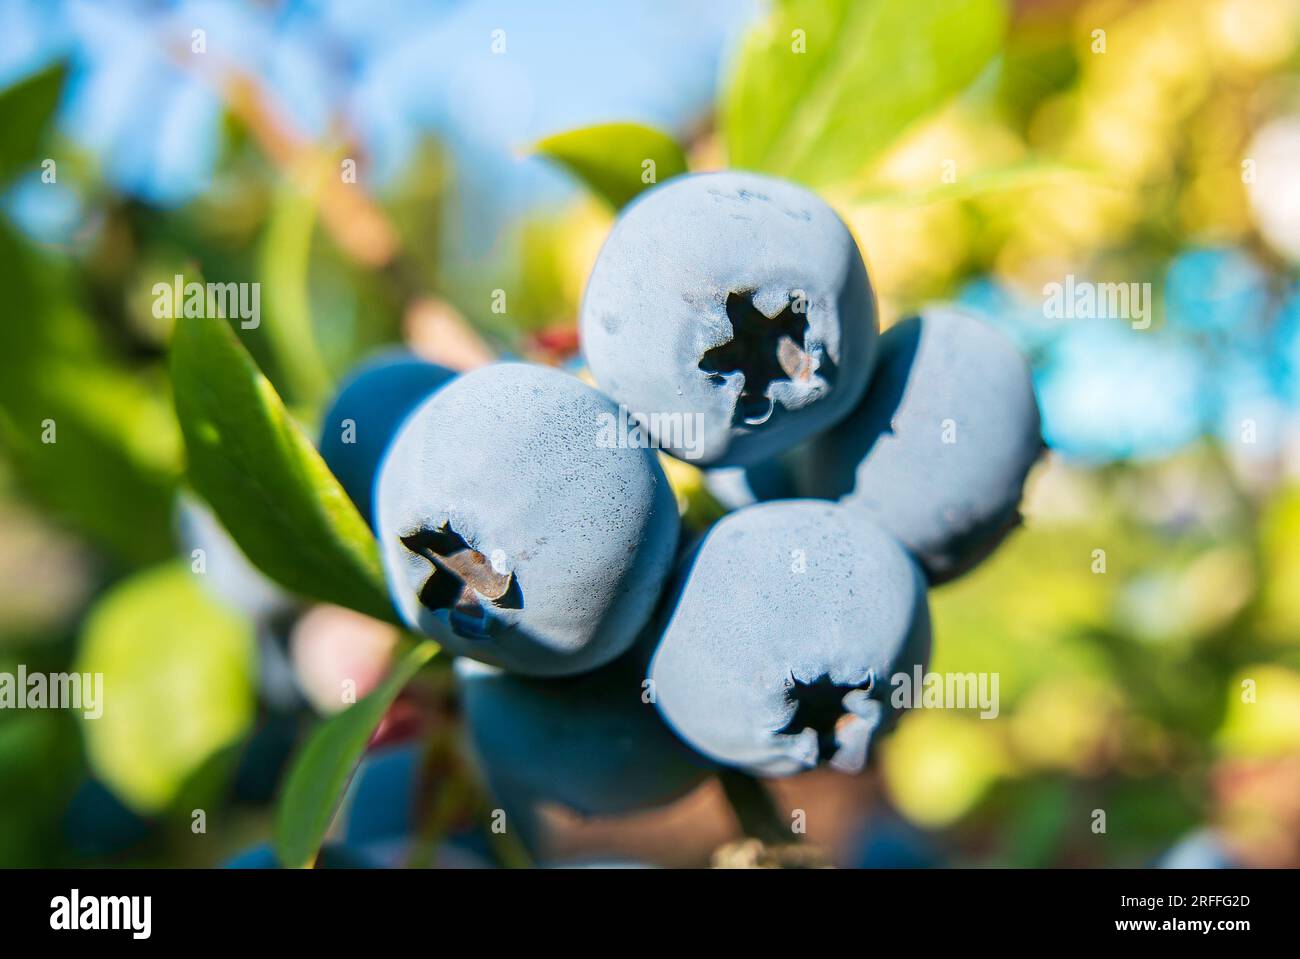 Blueberries. Bunches of ripe large berries blueberry plant Stock Photo